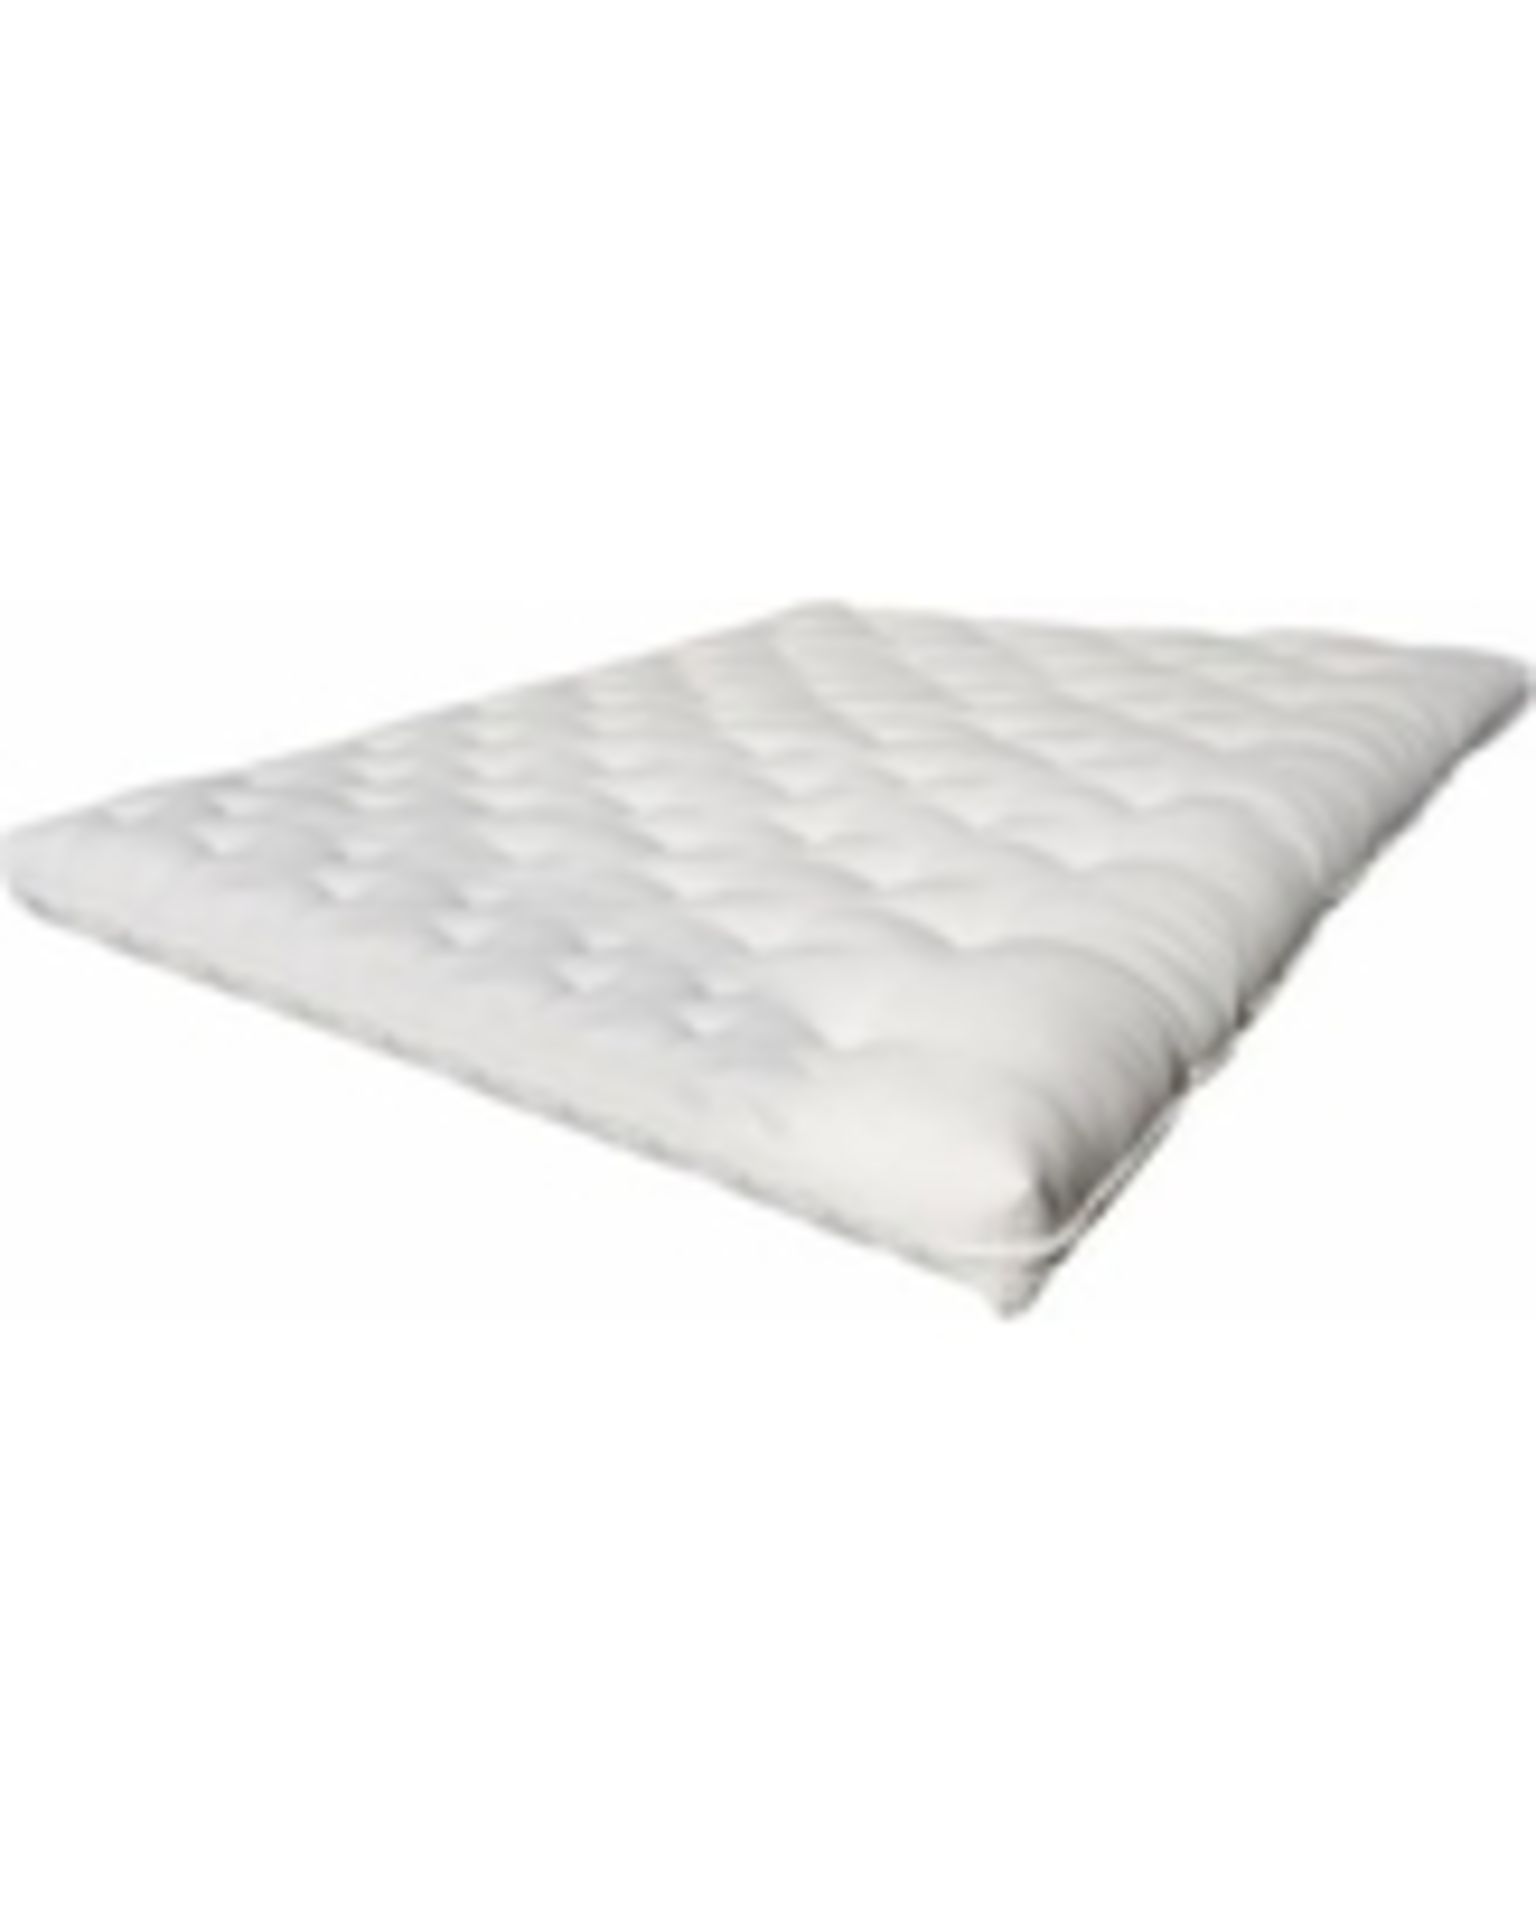 V Brand New Double Memory Foam Mattress Rolled - Contours To Your Body Shape - Suitable For Mattress